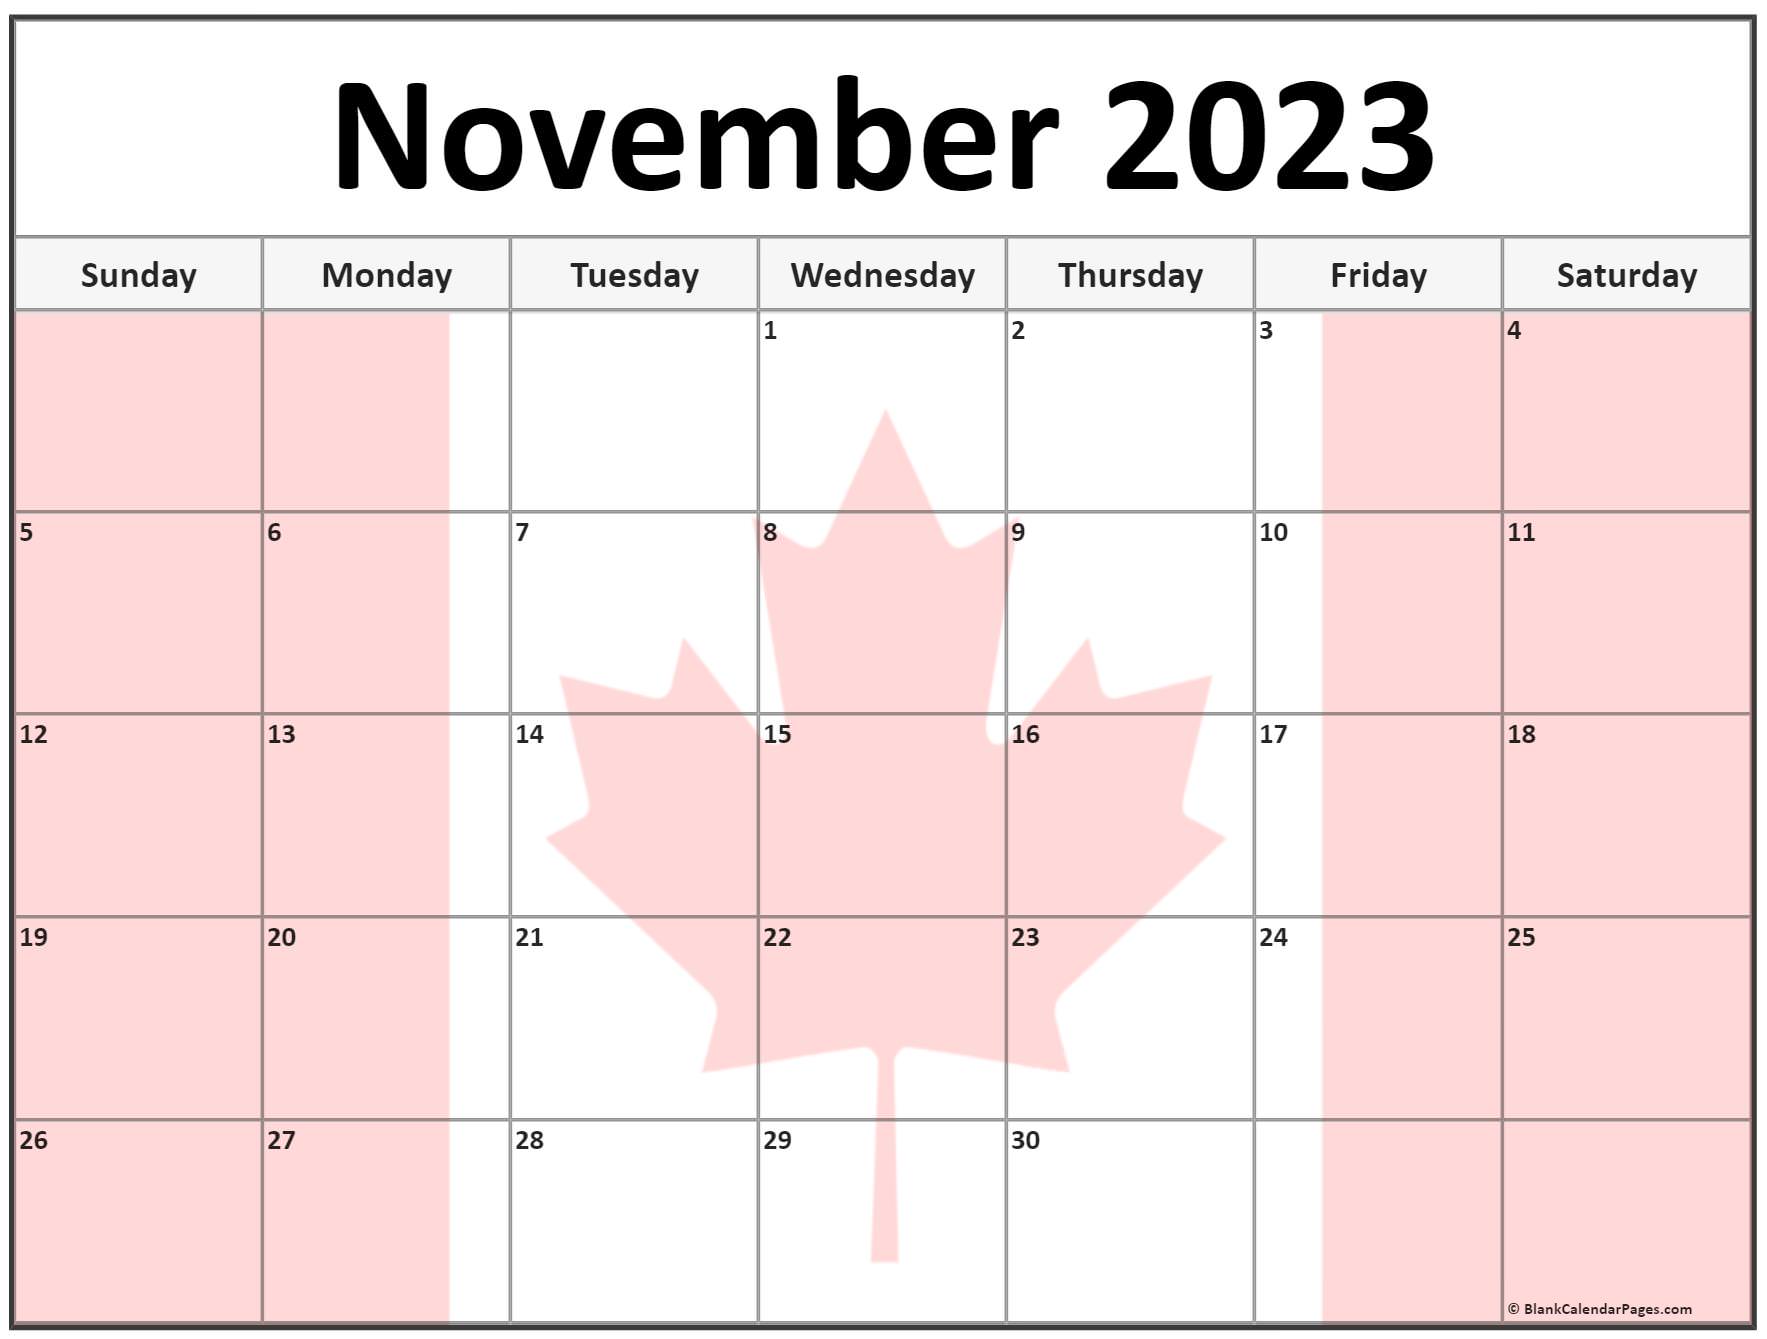 collection-of-november-2023-photo-calendars-with-image-filters